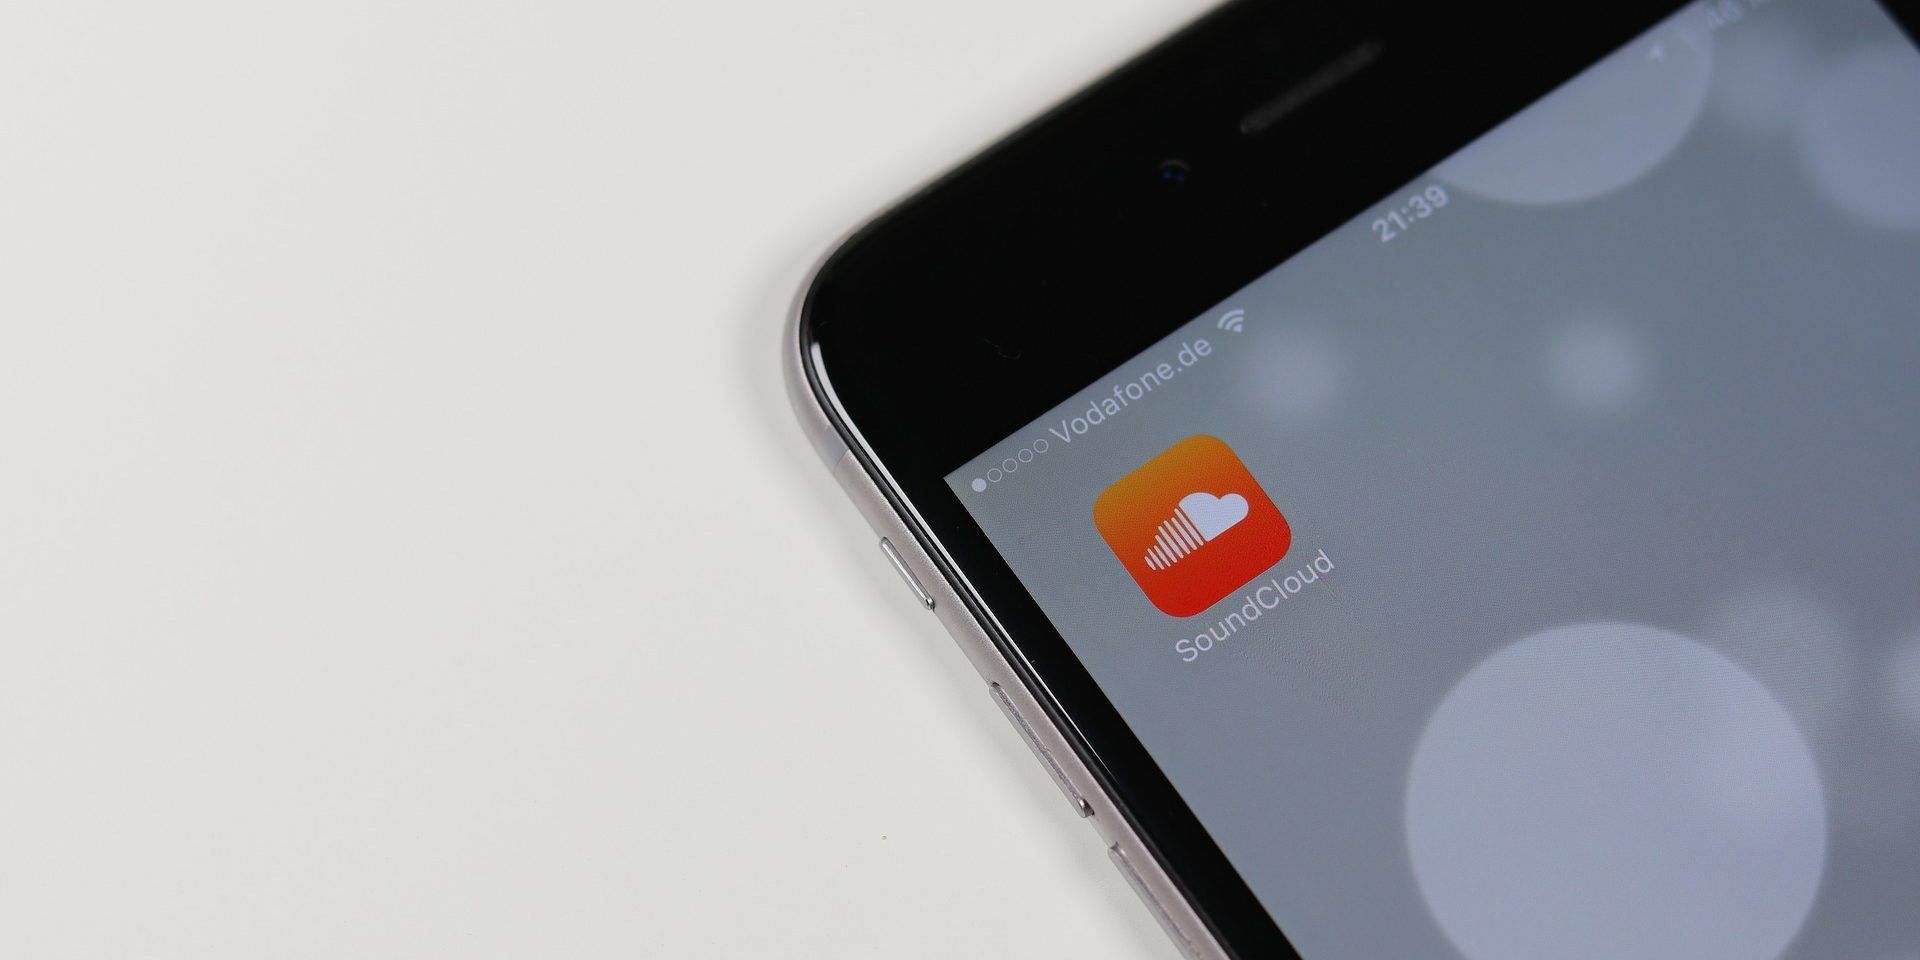 The Soundcloud app on the home screen of an iPhone